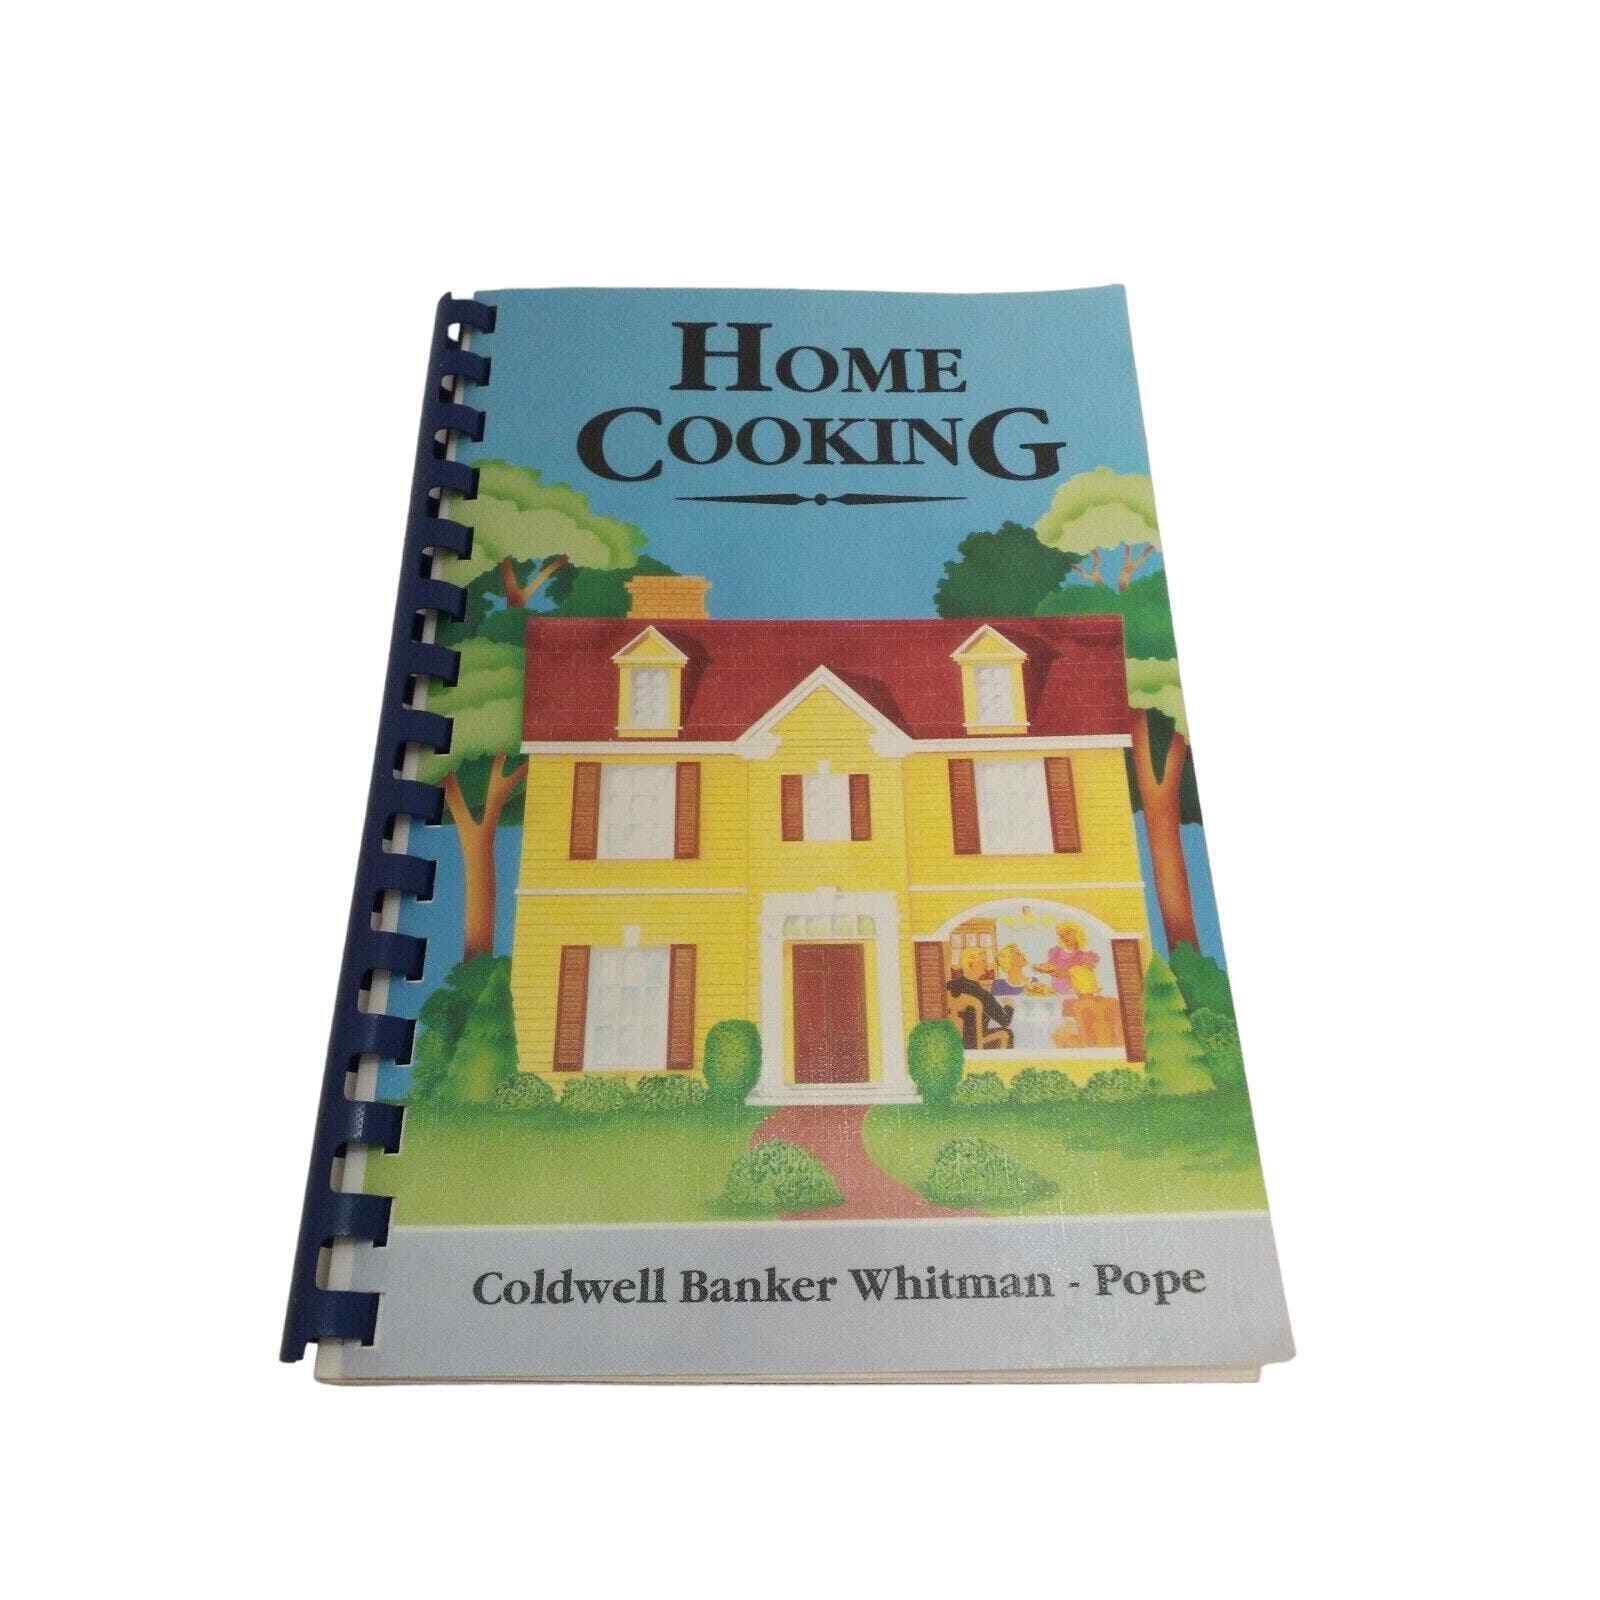 COLDWELL BANKER Whitman-Pope COOK BOOK 2001 Lapeer MI